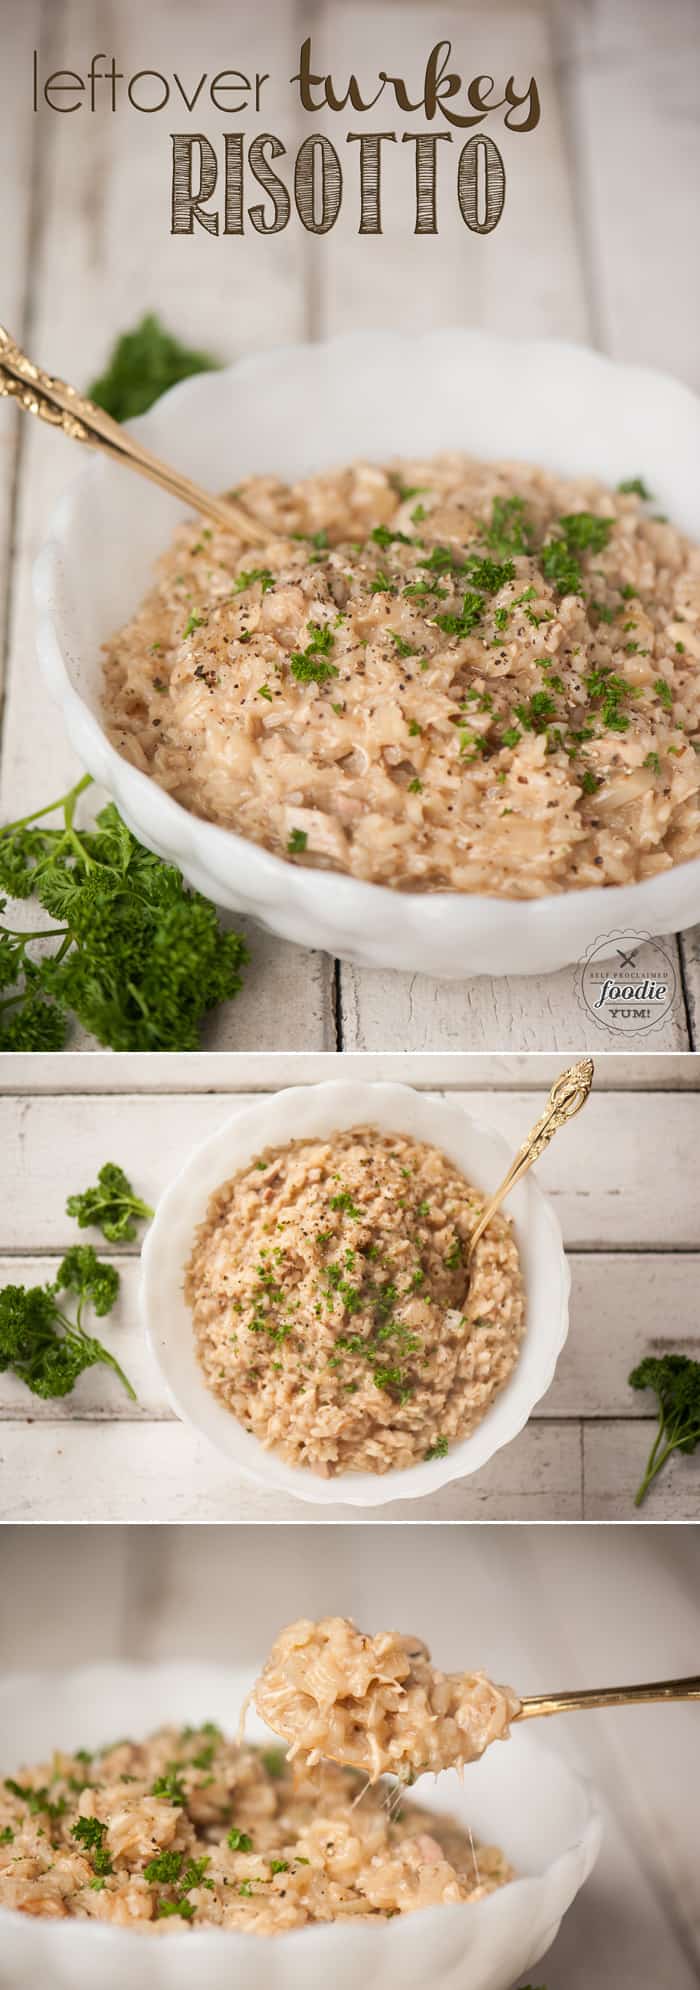 Leftover Turkey Risotto | Self Proclaimed Foodie